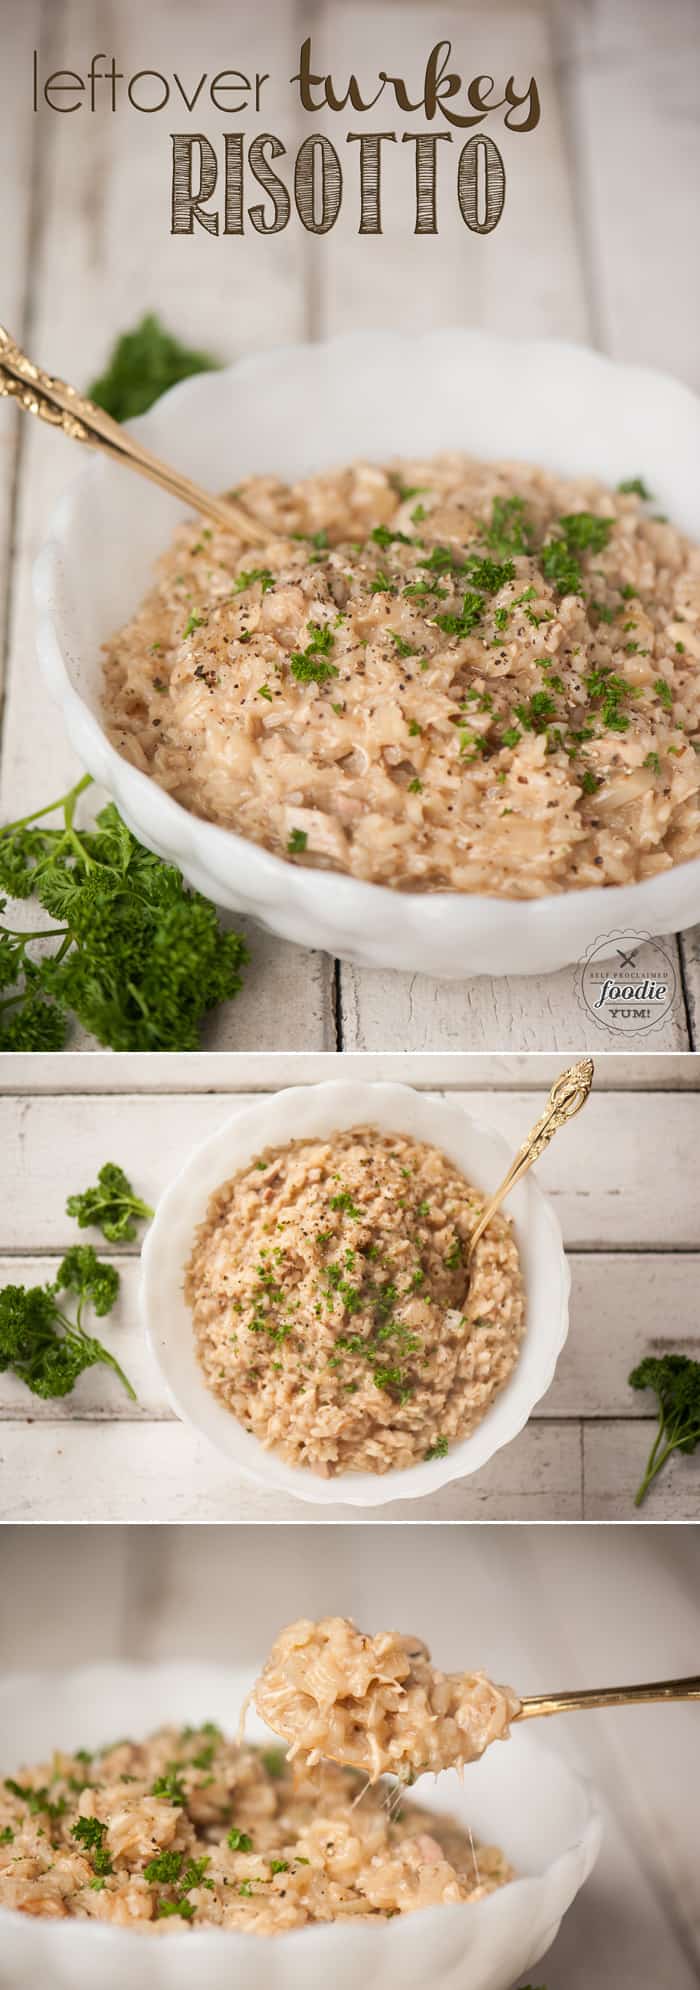 Leftover Turkey Risotto | Self Proclaimed Foodie